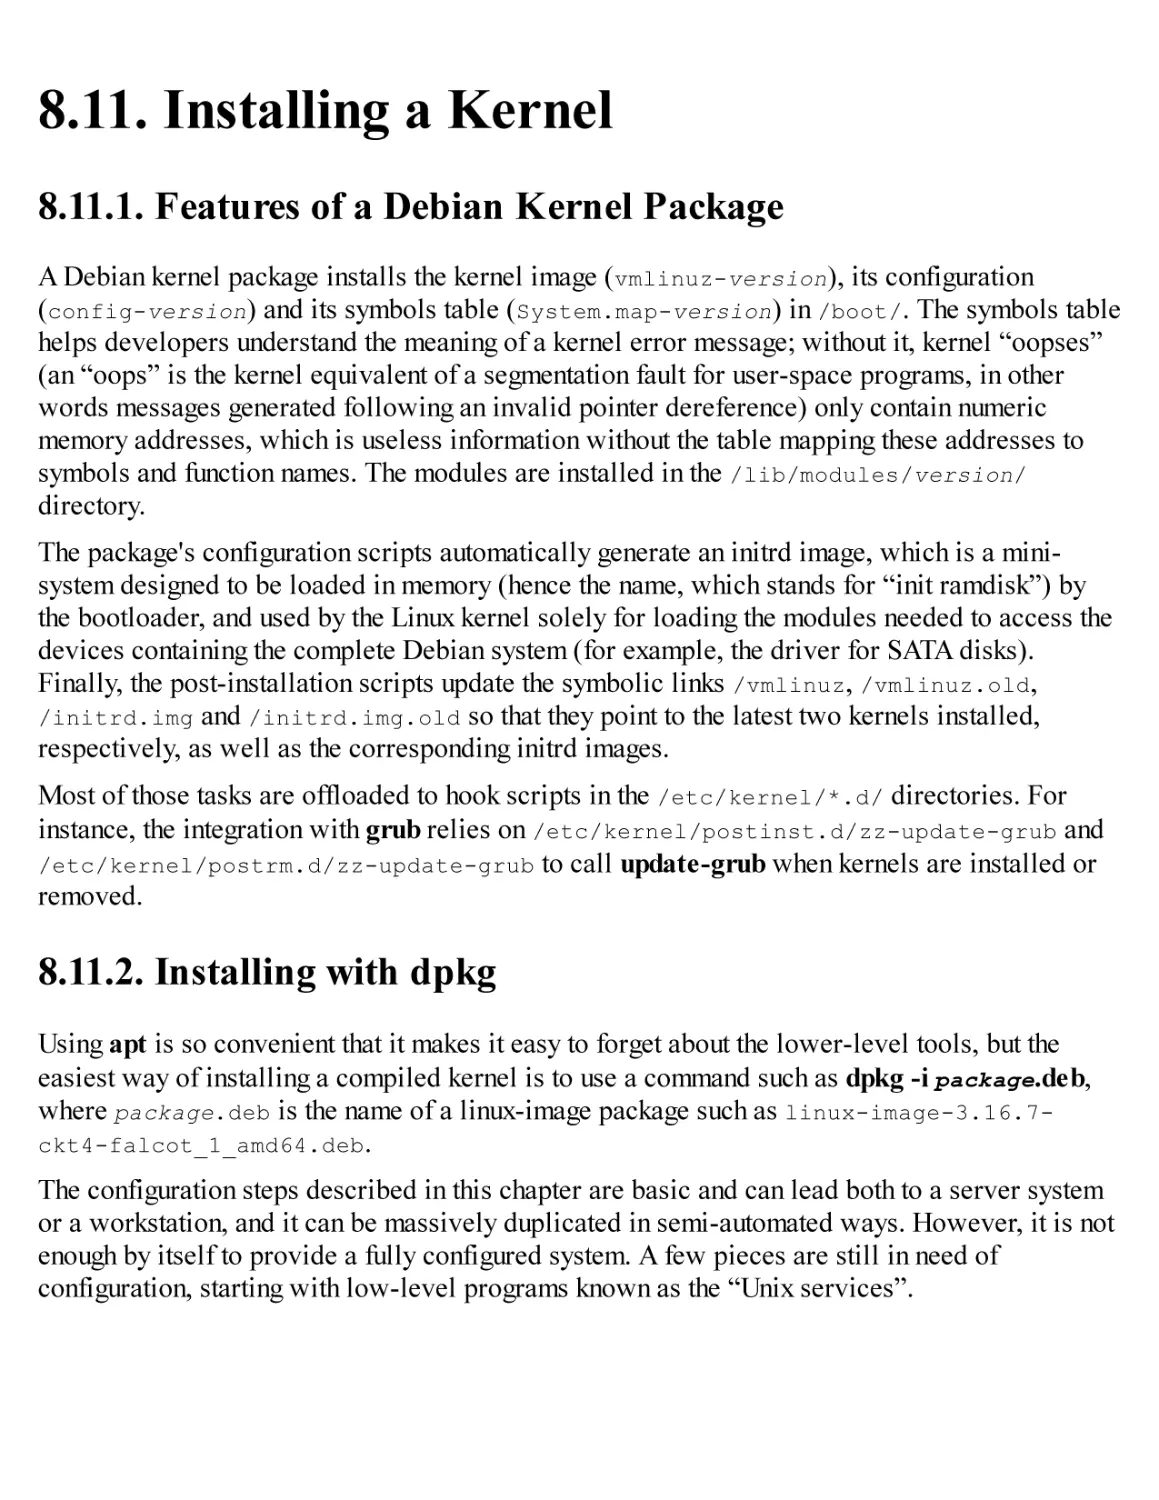 8.11. Installing a Kernel
8.11.1. Features of a Debian Kernel Package
8.11.2. Installing with dpkg